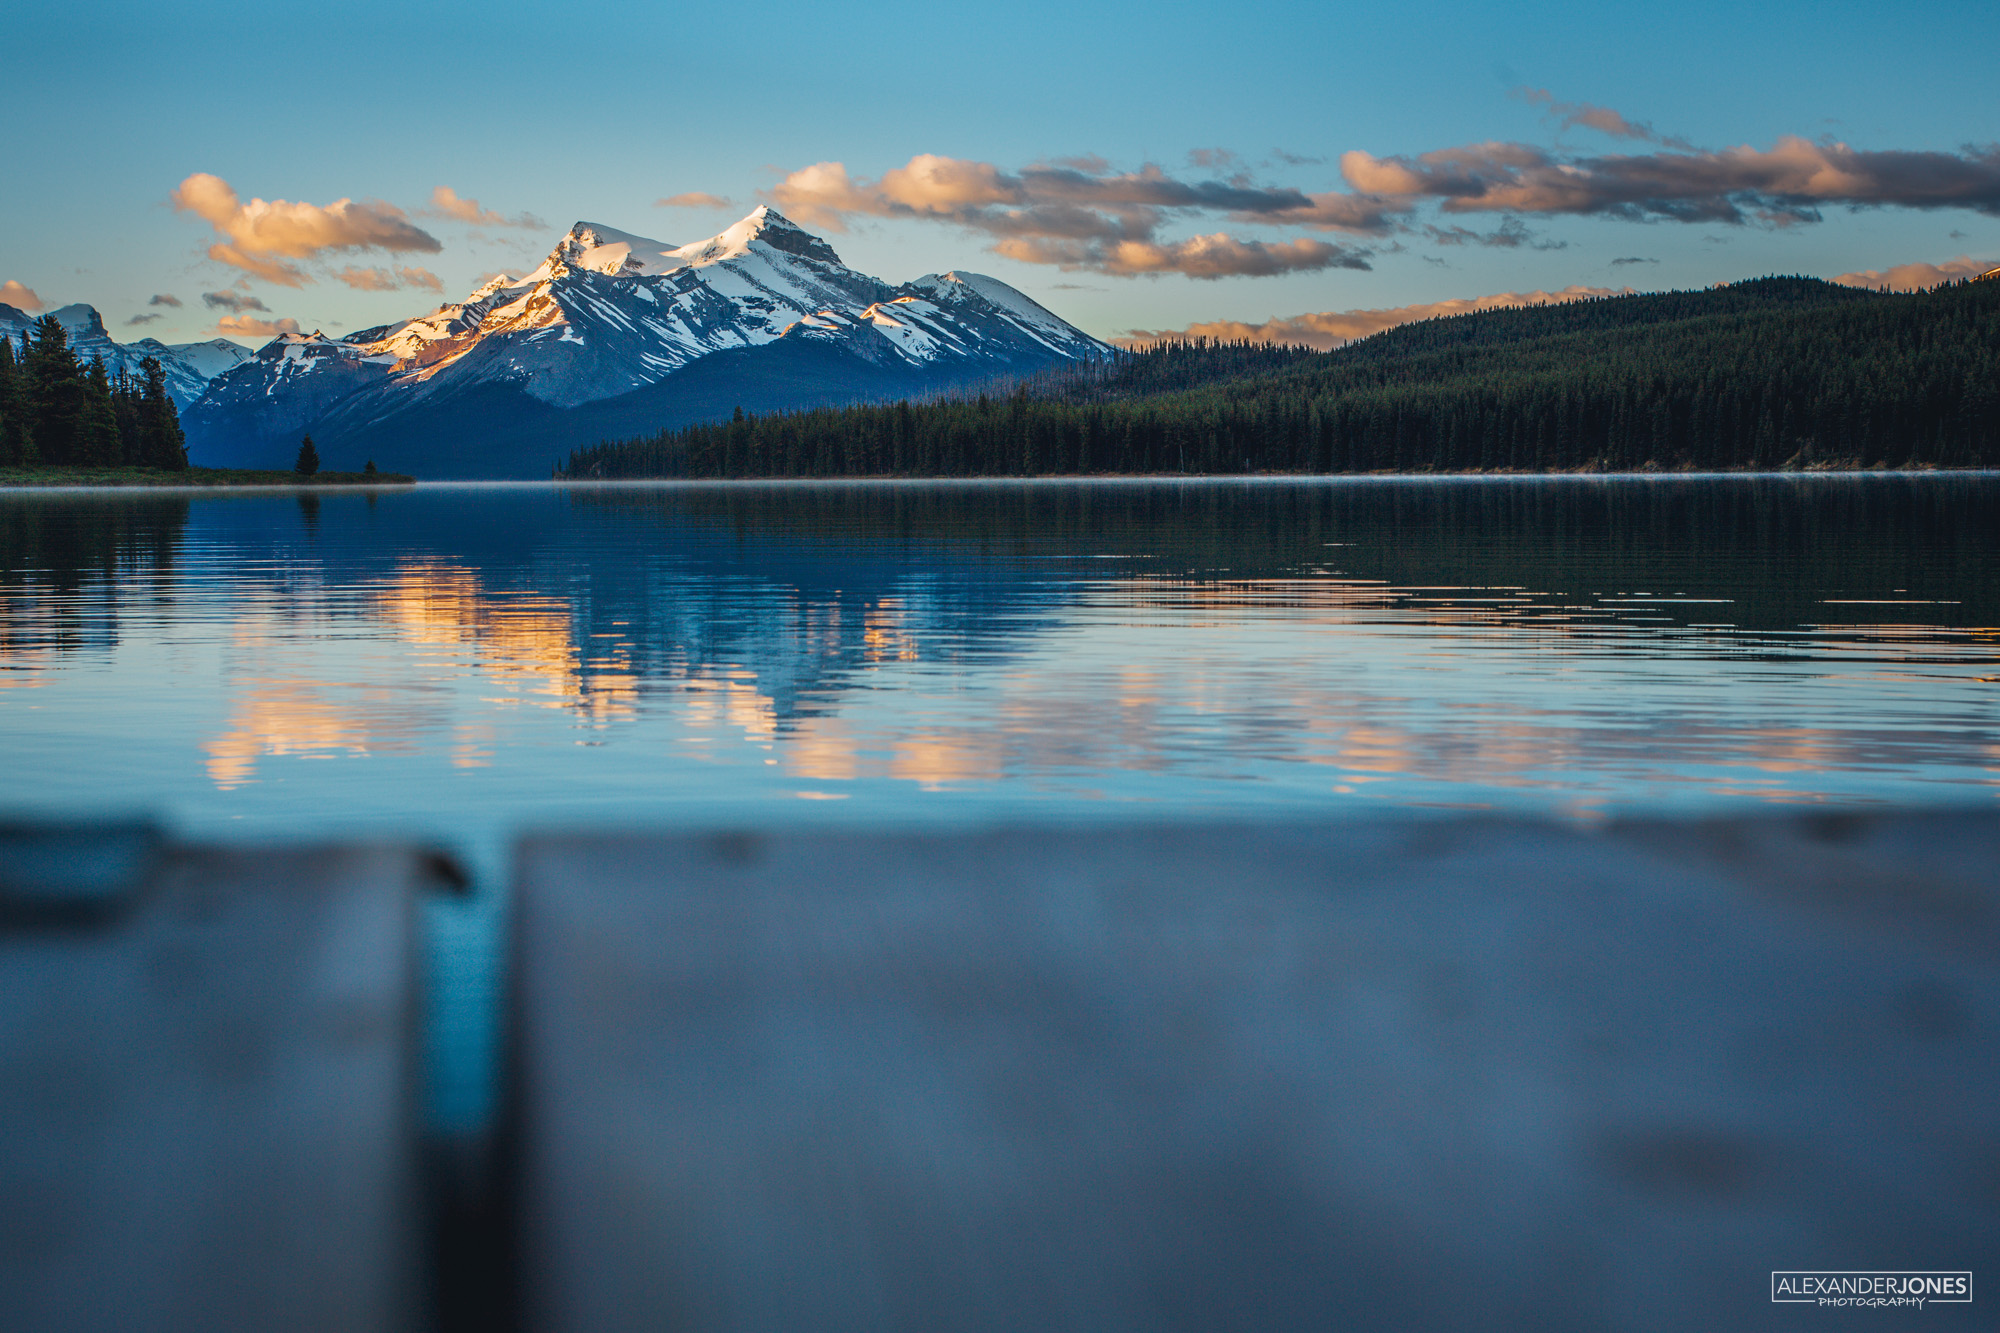 Sunrise over mountain lake at Maligne Lake in Jasper National Park in the Canadian Rocky Mountains